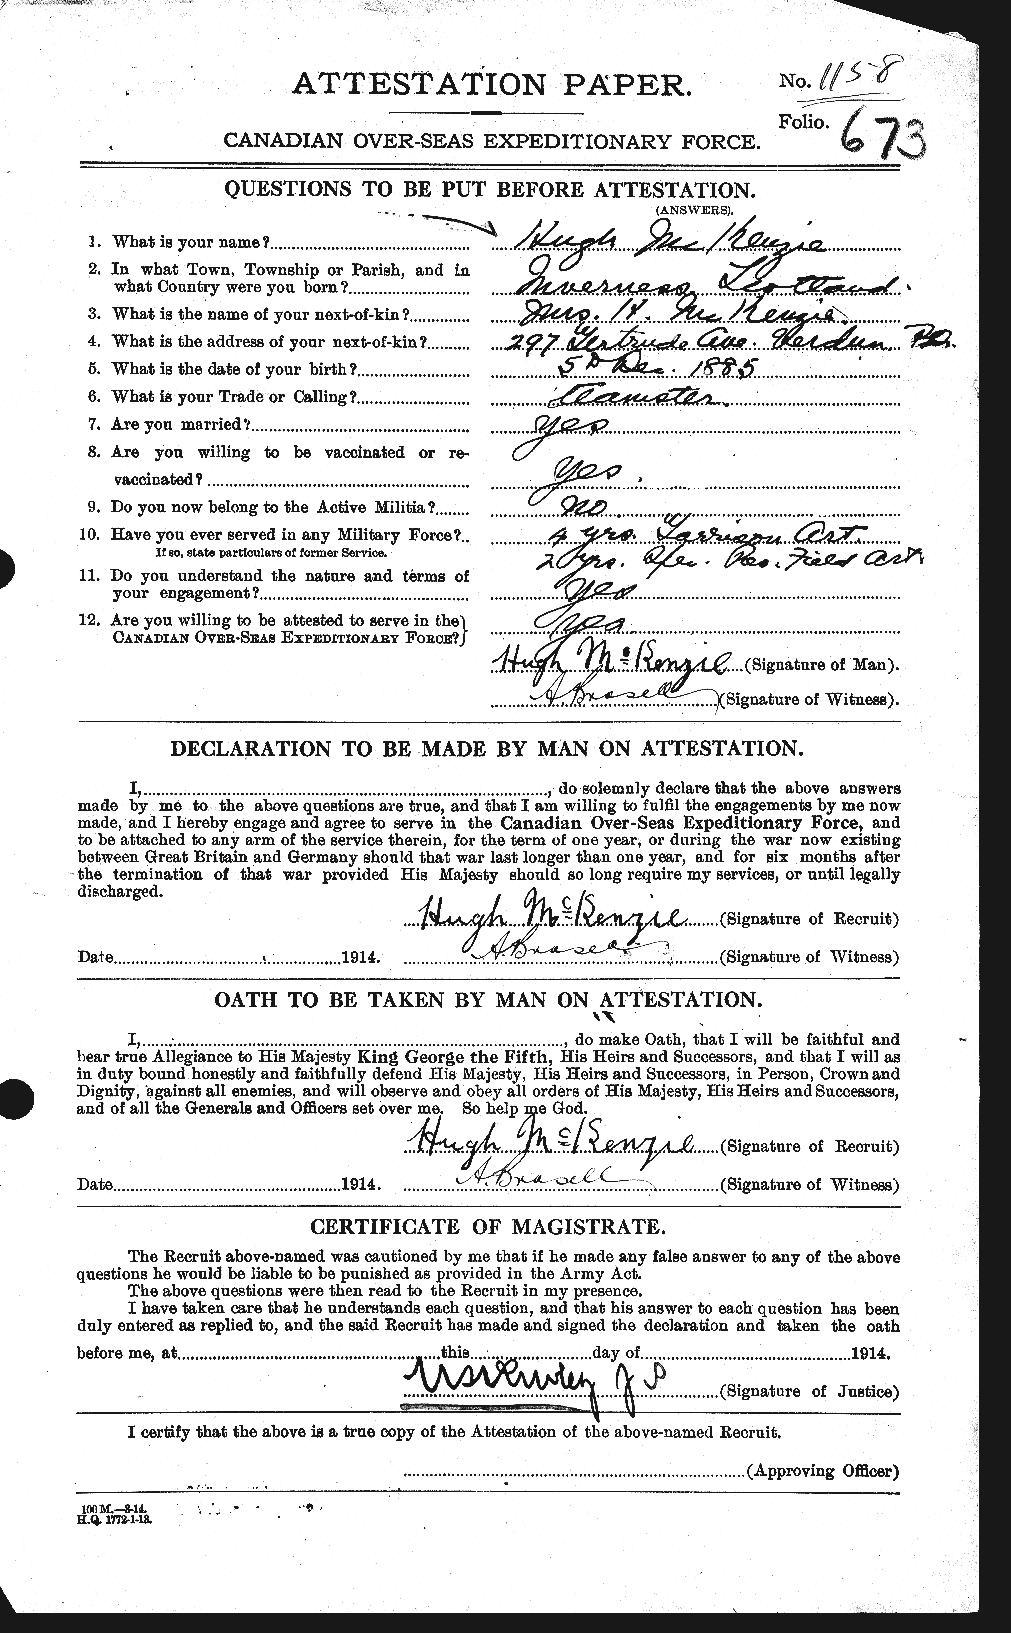 Personnel Records of the First World War - CEF 206292a